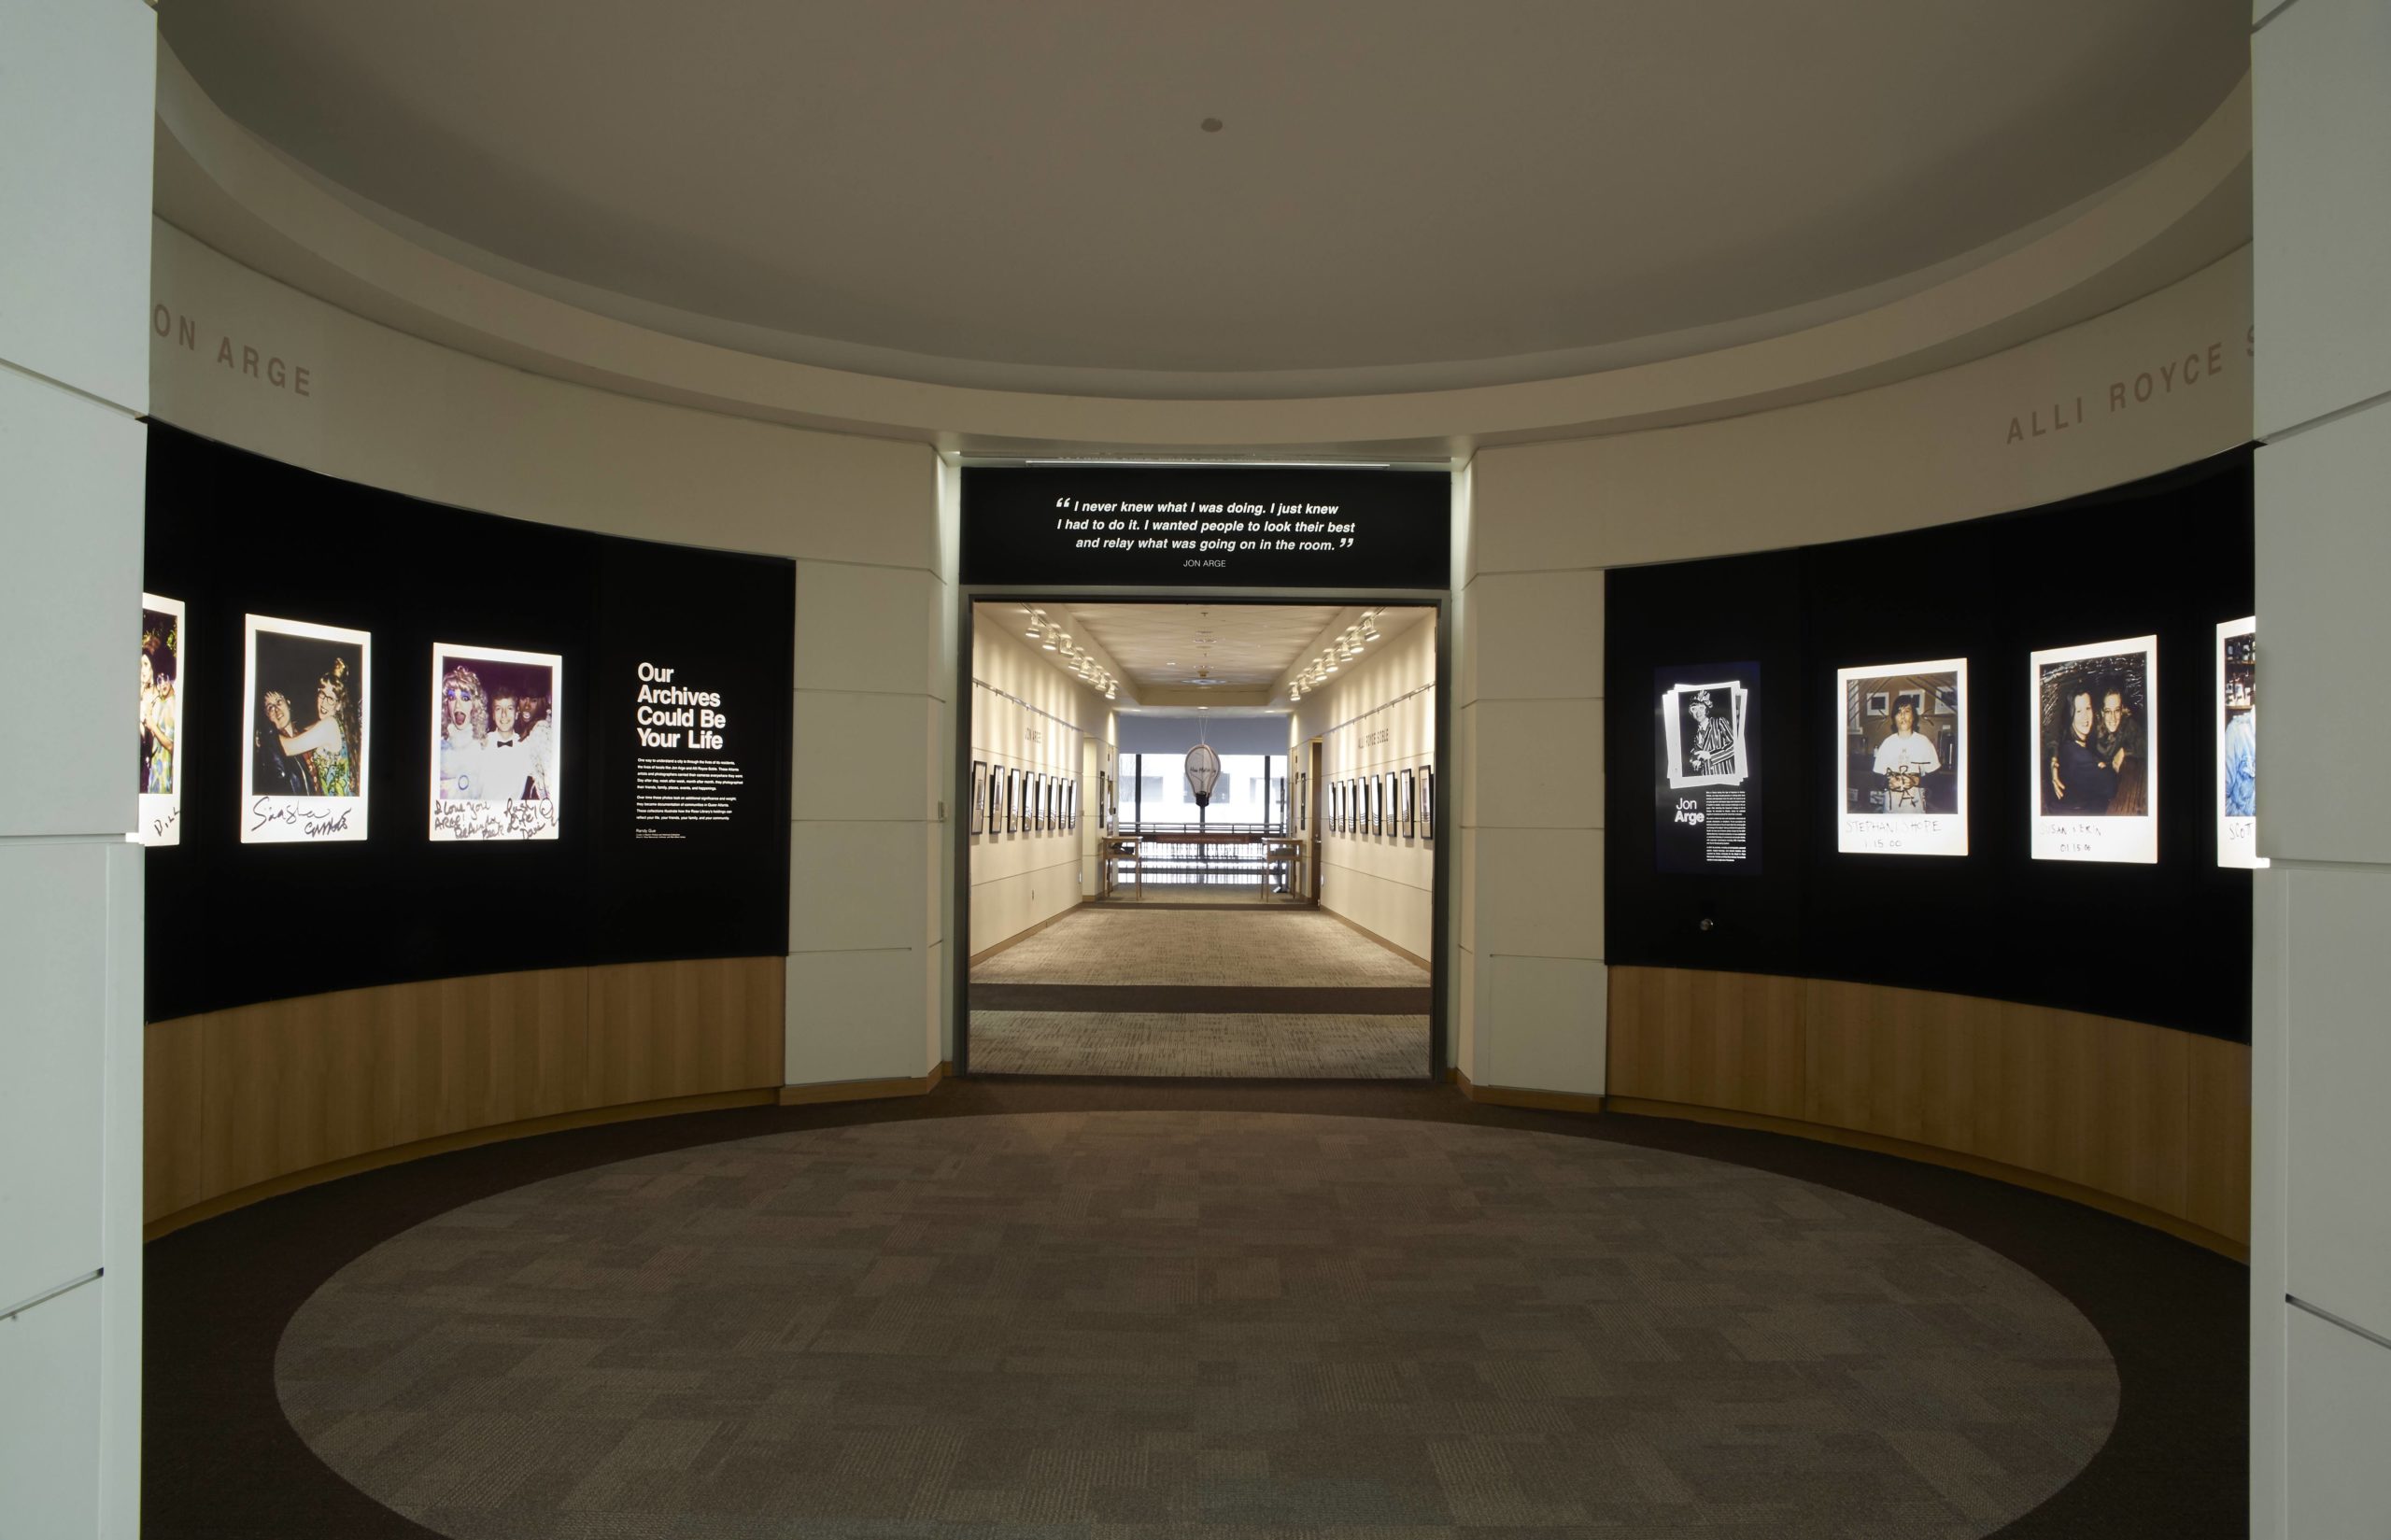 Photograph of "Our Archives Could Be Your Life" exhibit rotunda in Emory University's Woodruff Library